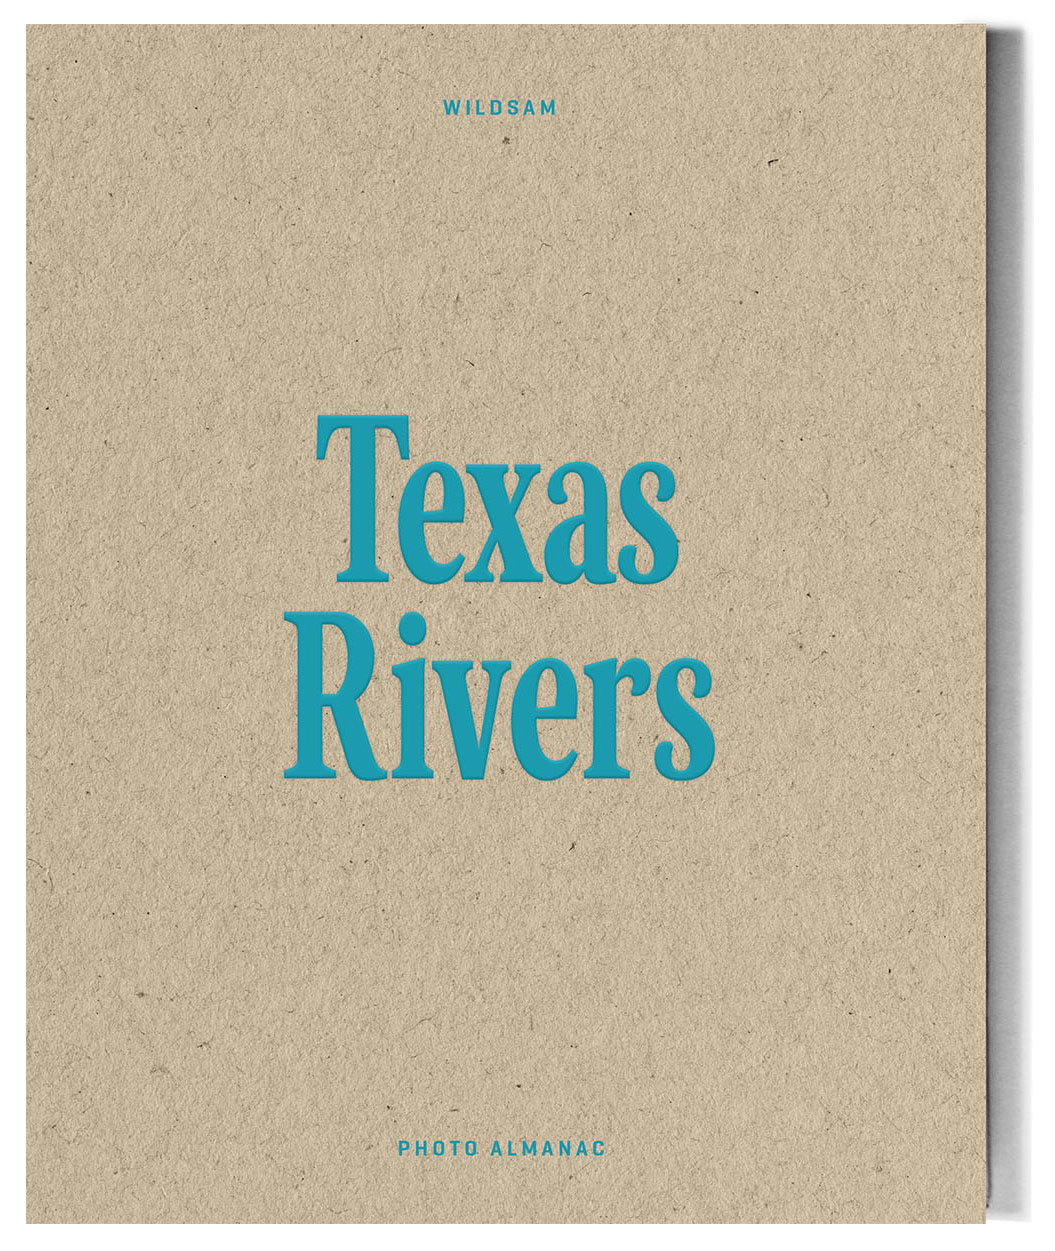 The cover of a guidebook reading "Texas Rivers"